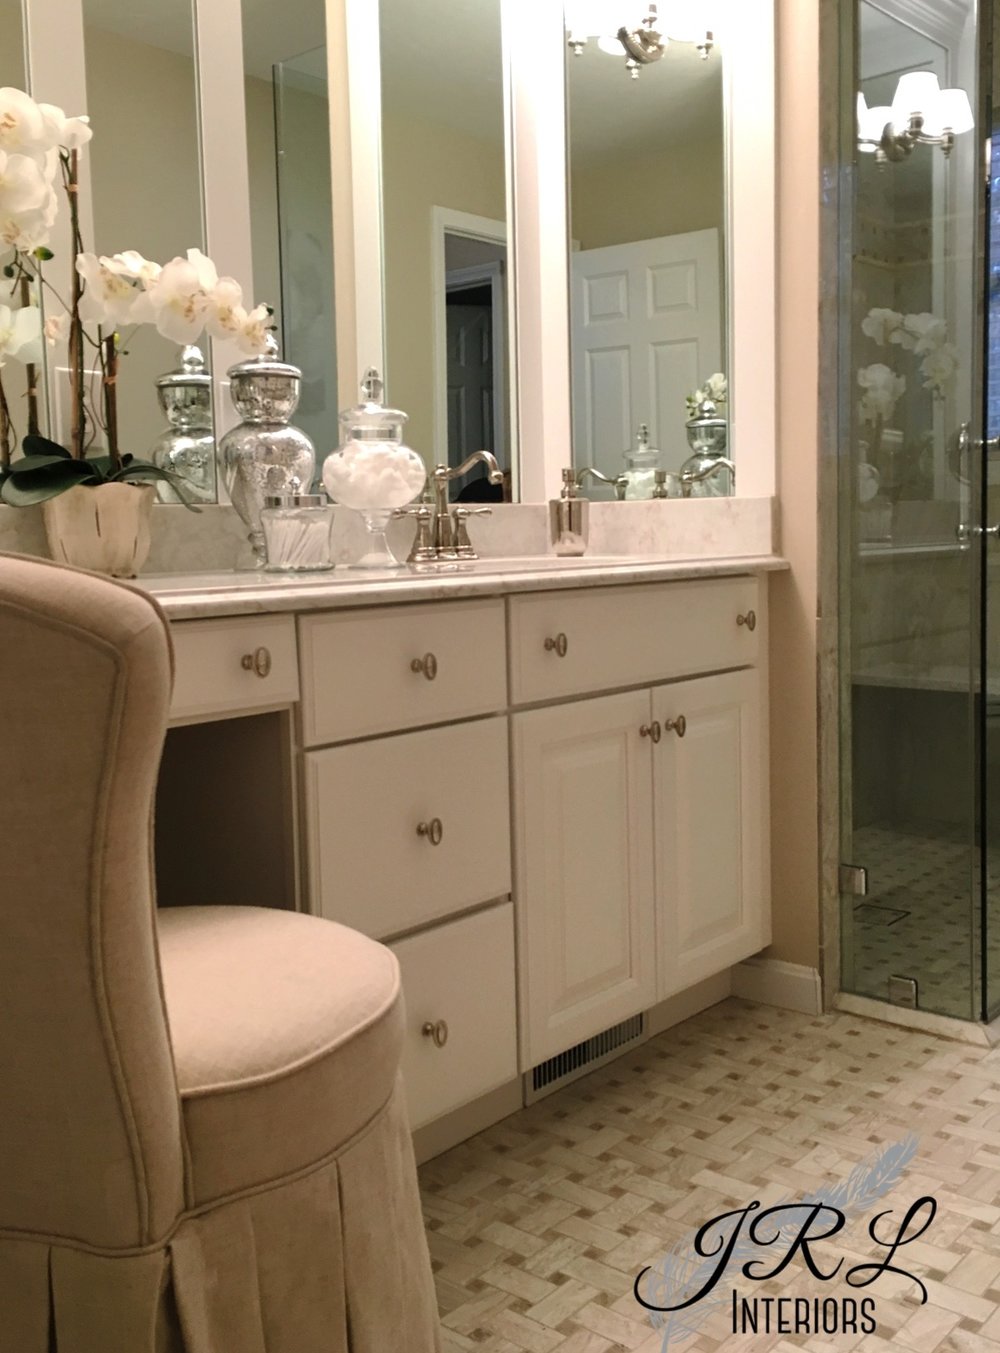 Jrl Interiors What Height Stool Do I, Bathroom Vanity Chairs With Casters